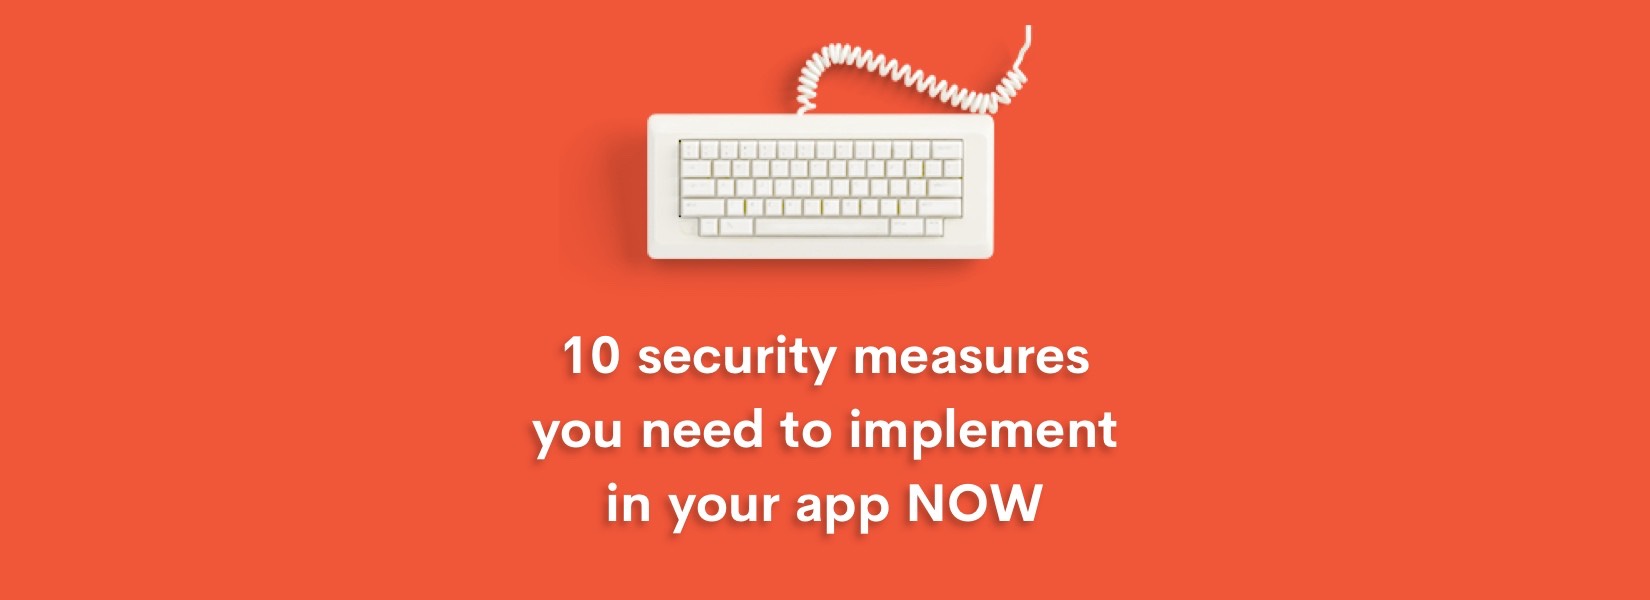 10 security measures you need to implement in your app NOW